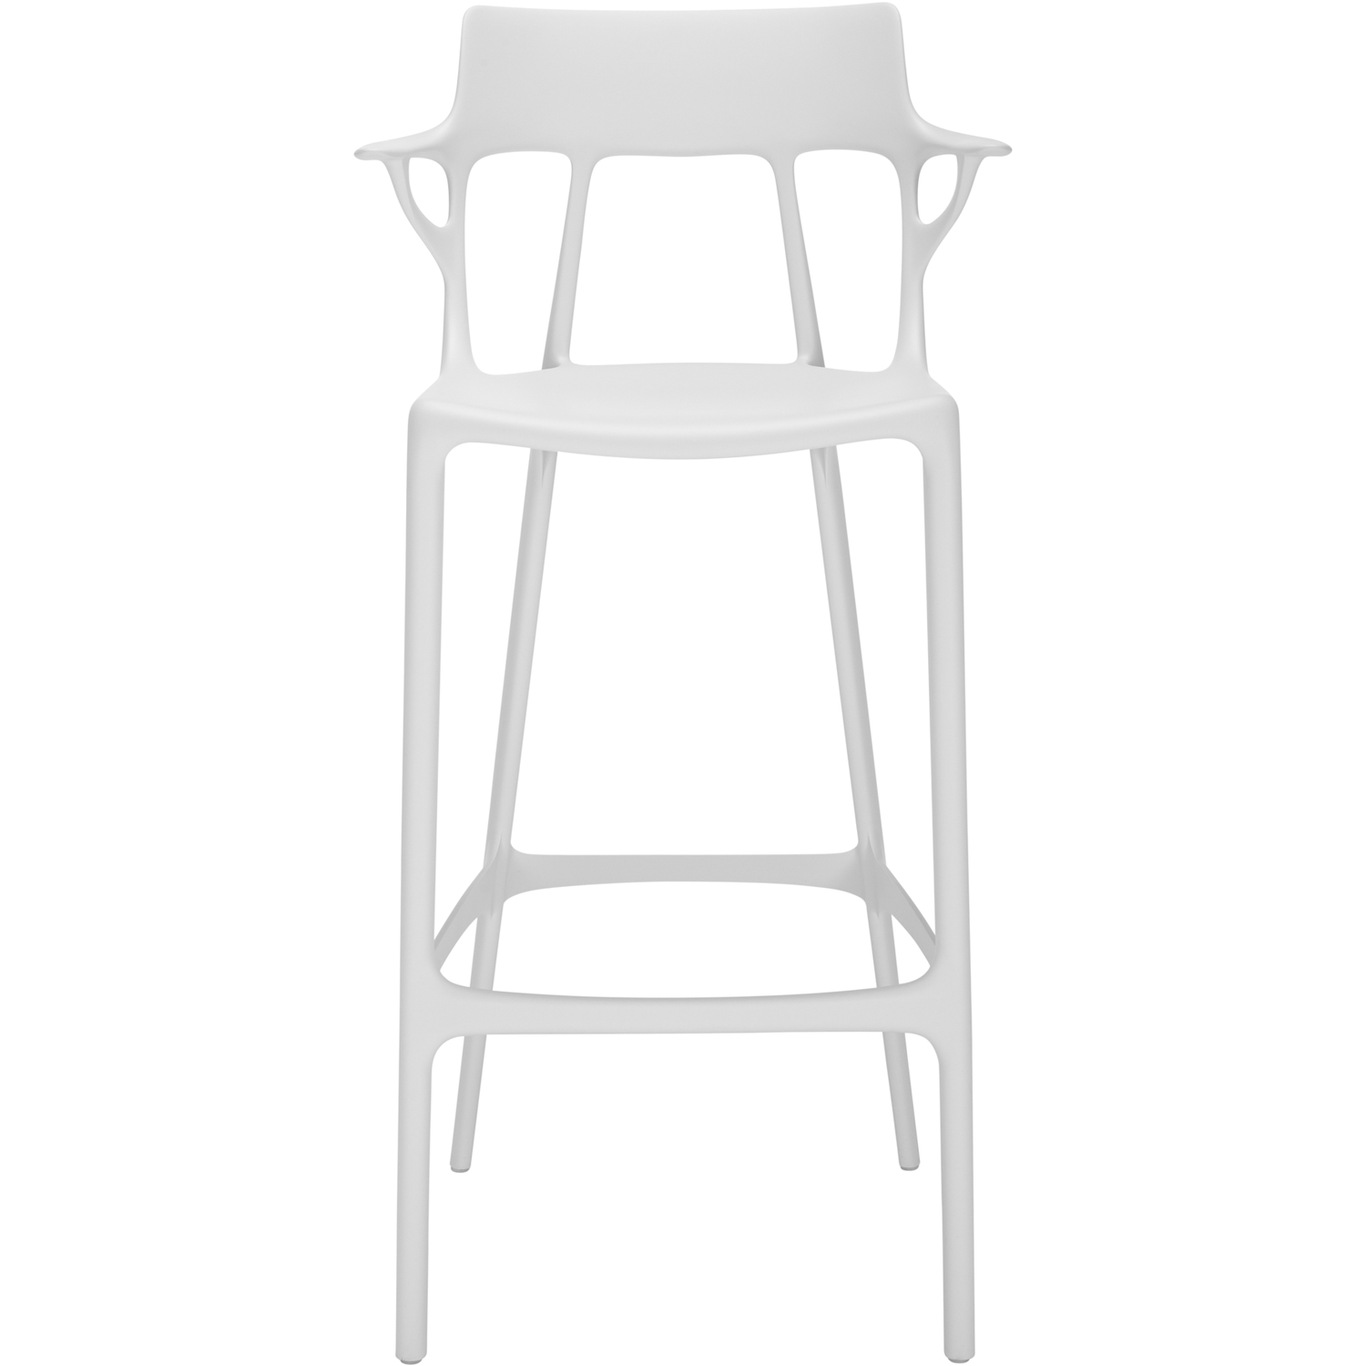 A I Bar Stool Recycled 75 Cm White, Recycled Bar Stools